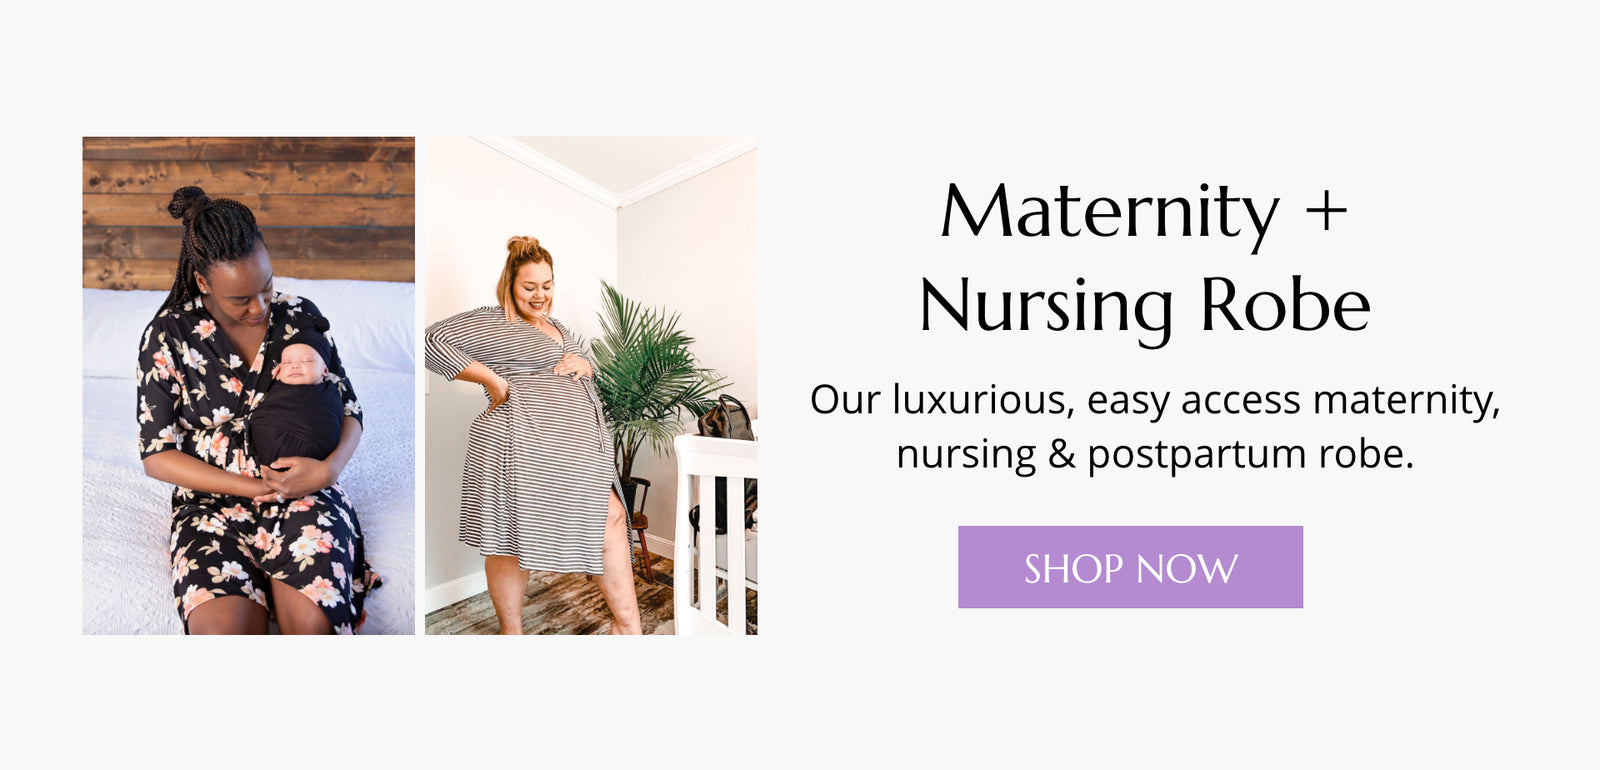 Maternity Hospital Gown Delivery Robe White Perfect as Labor